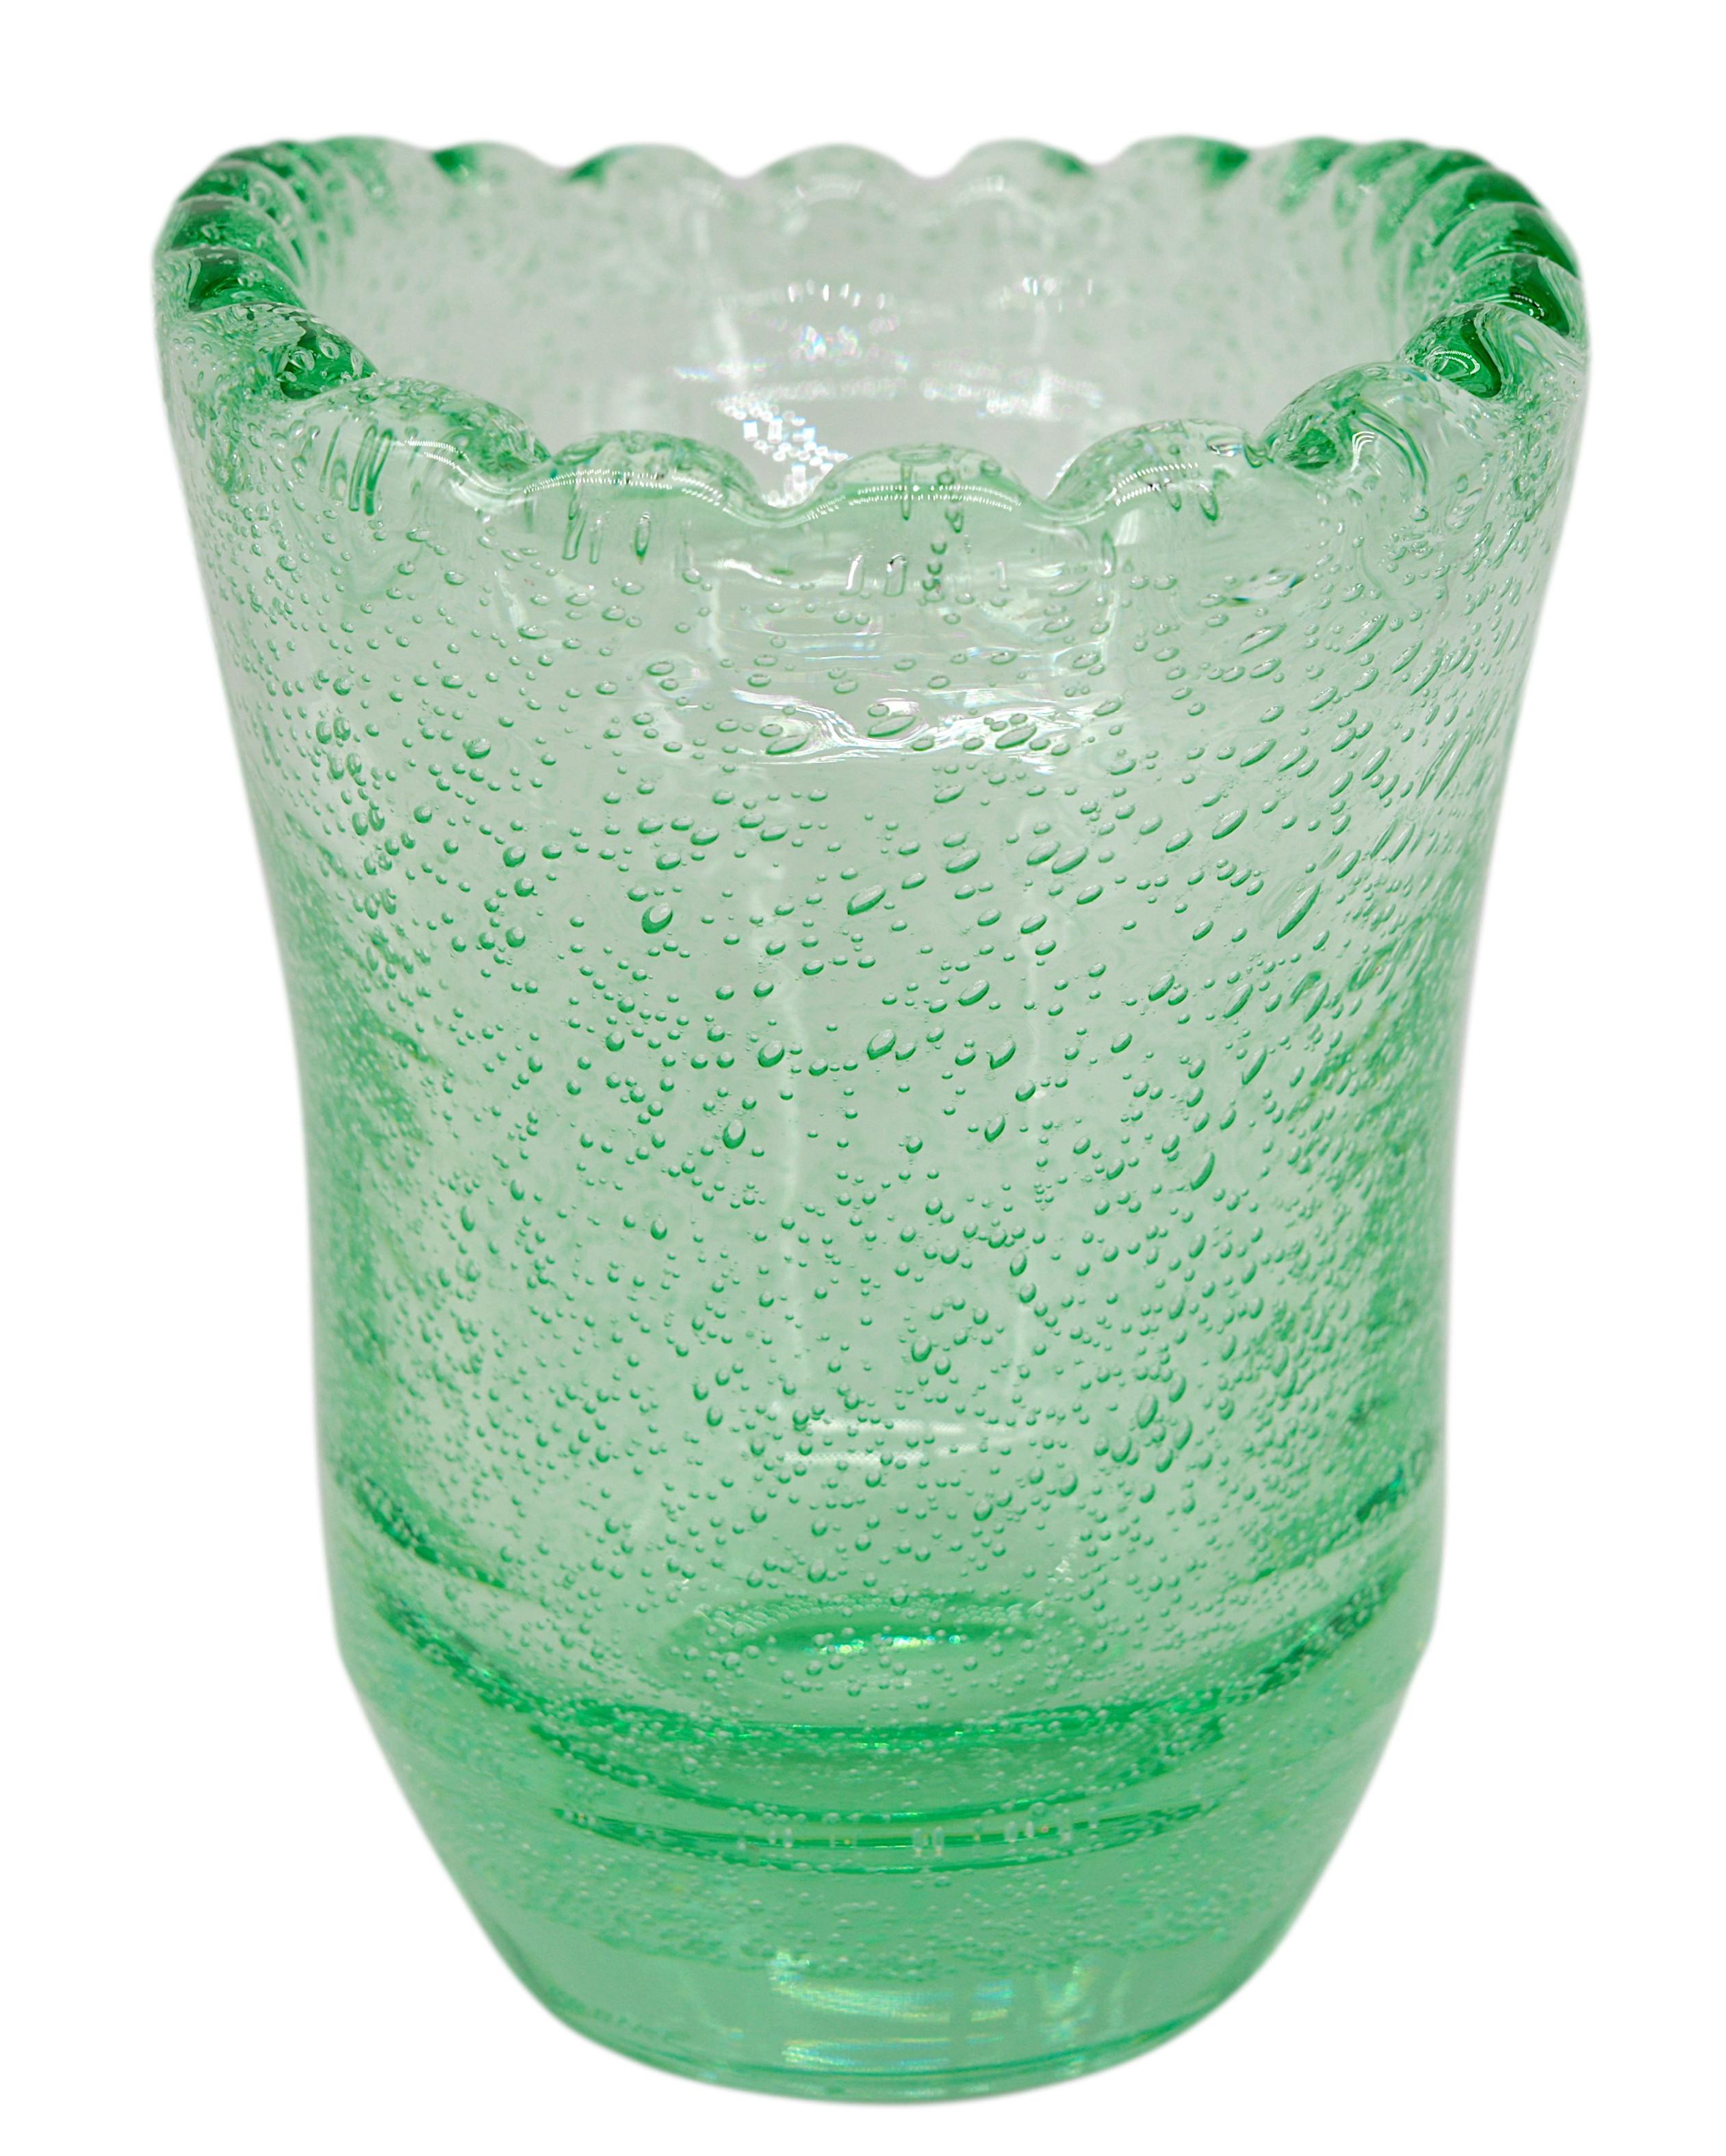 French Art Deco glass vase by Daum (Nancy), France, 1930s. Thick blown and bubbled glass vase. Color : green. Measures: Height : 7.5